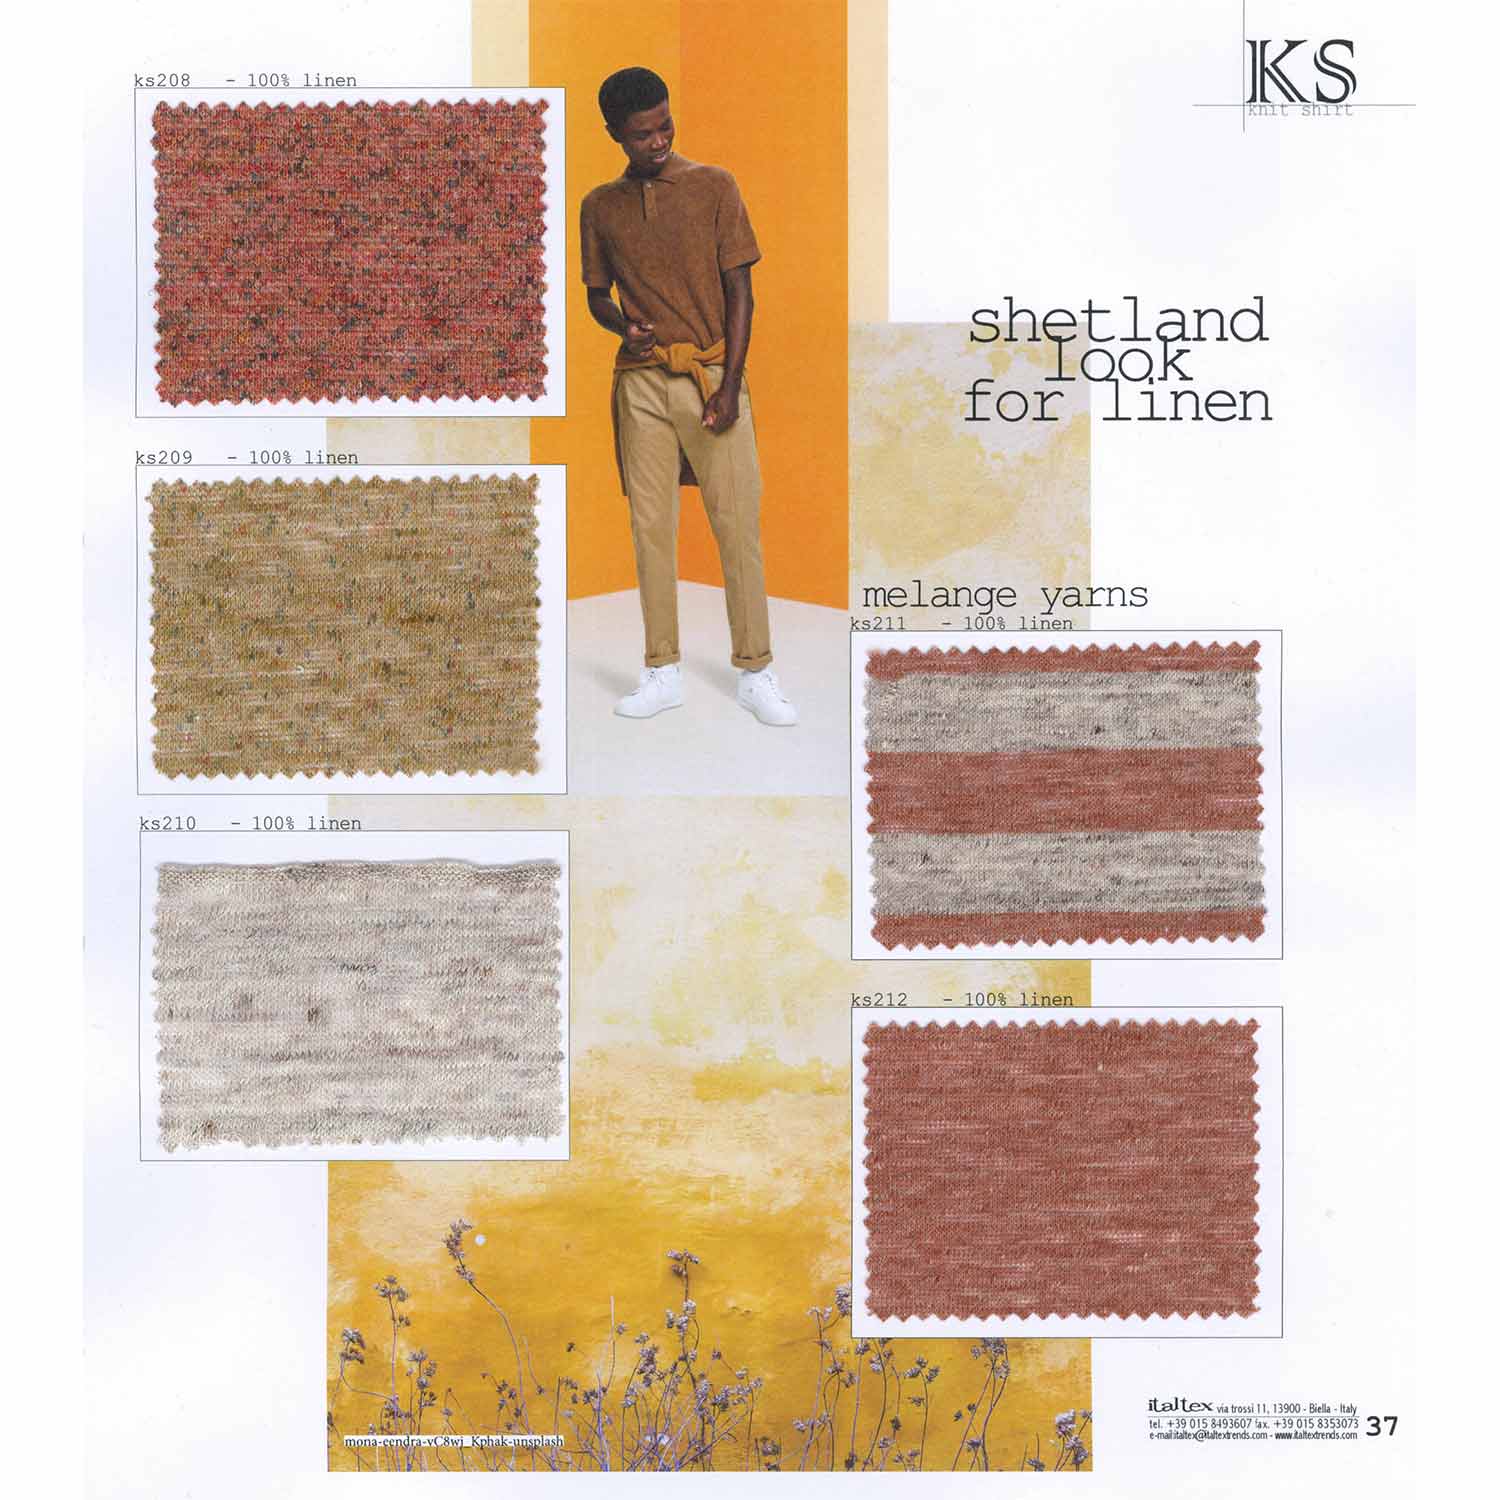 Five fabric swatches for t-shirts and polo shirts in melange linen, for a shetland look. Four fabrics a yarn dyed plains, one is a striped pattern alternating grey and reddish brown